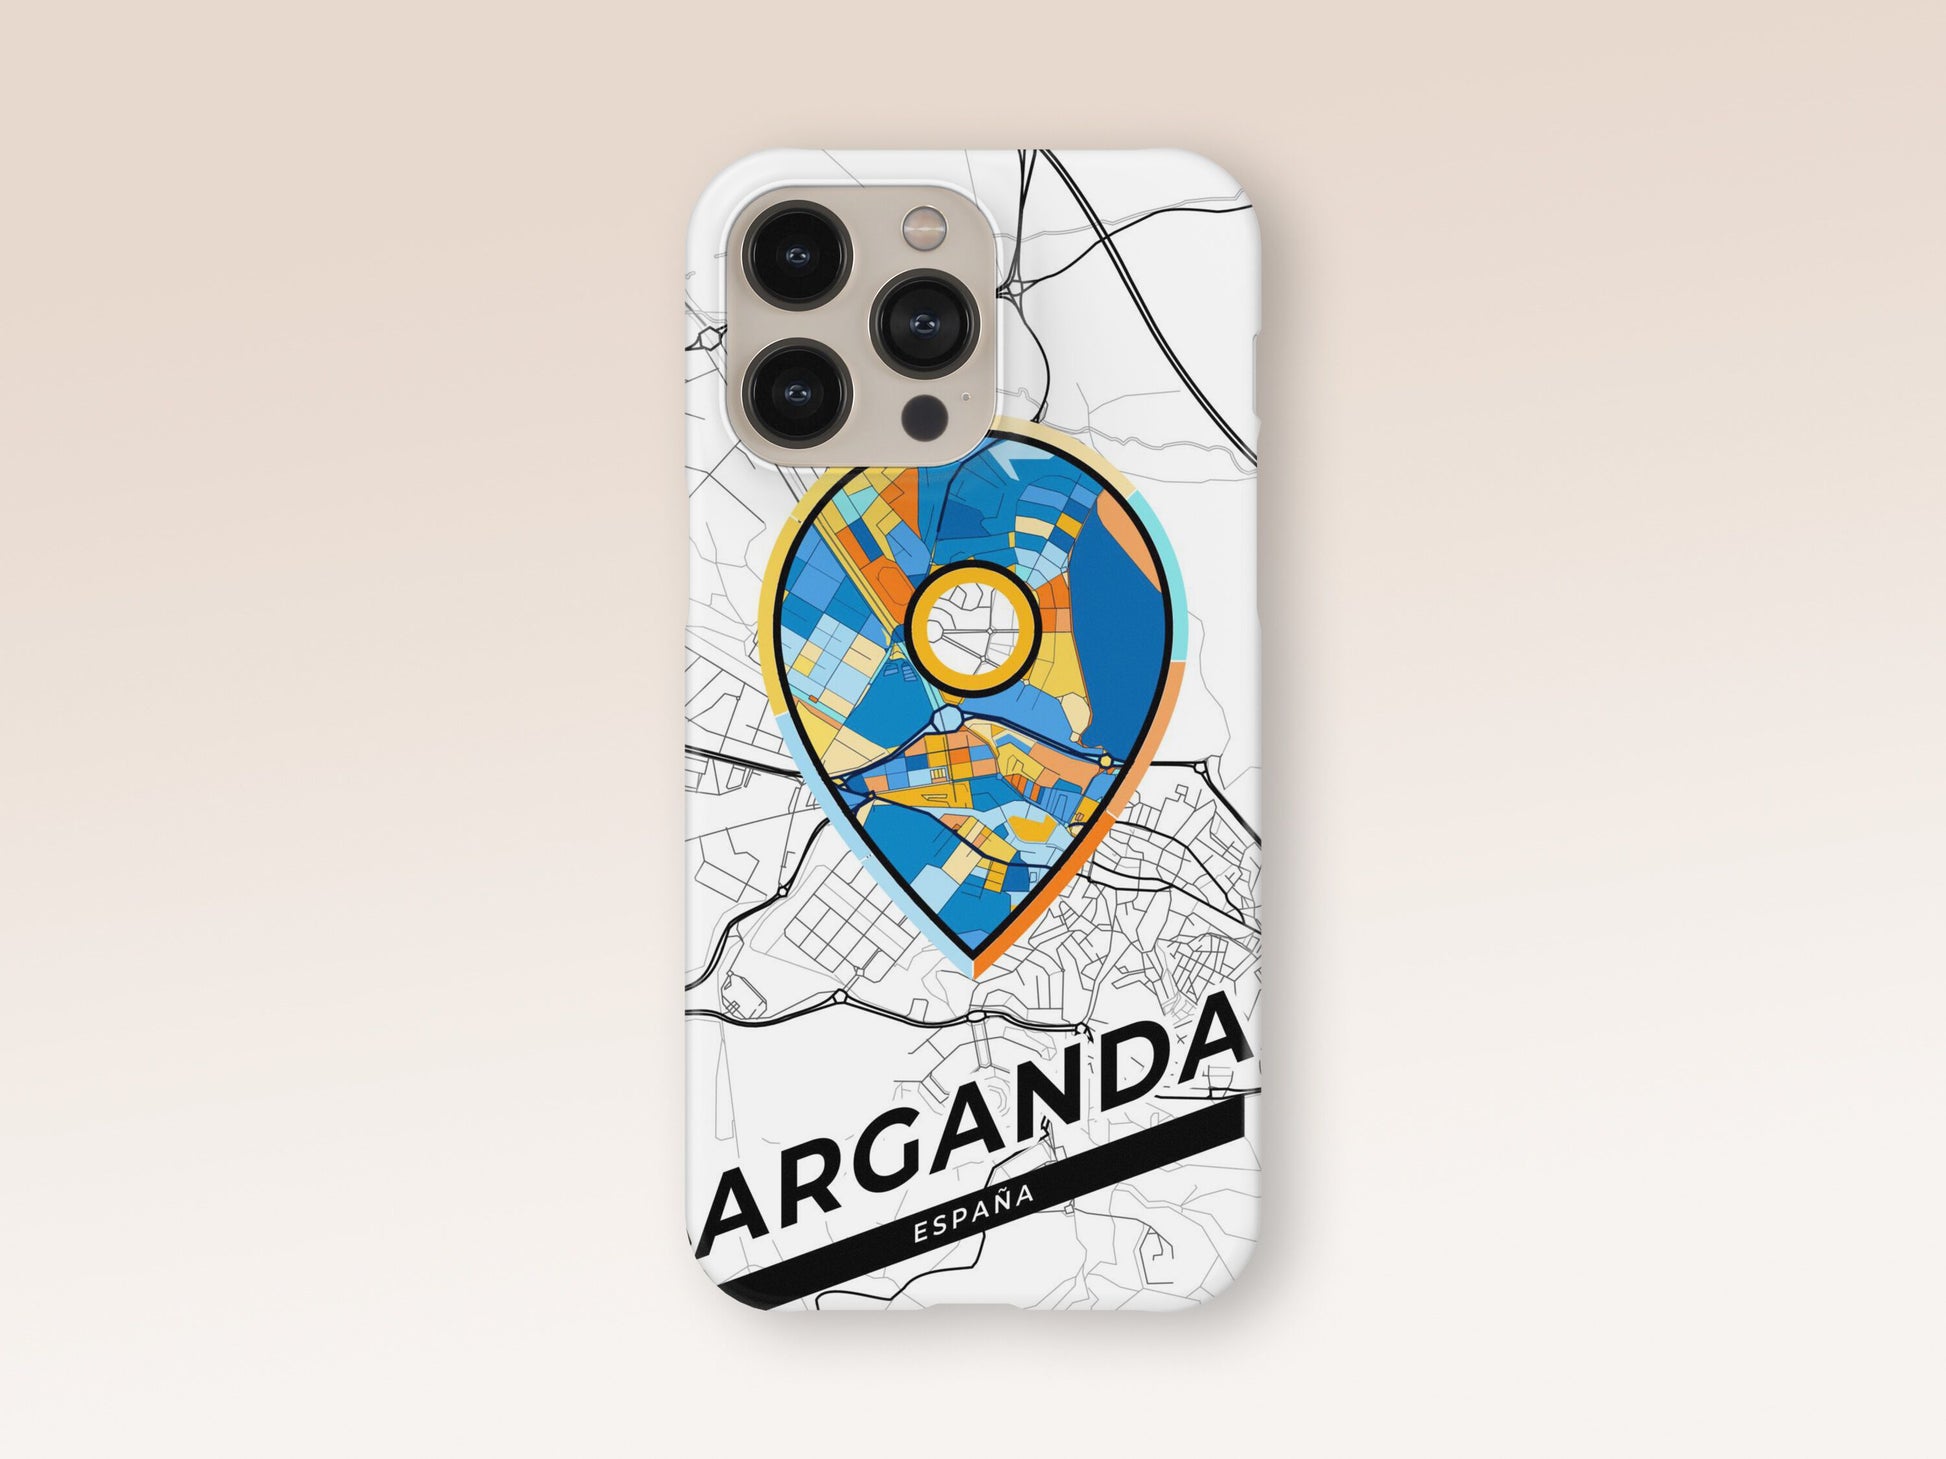 Arganda Spain slim phone case with colorful icon. Birthday, wedding or housewarming gift. Couple match cases. 1